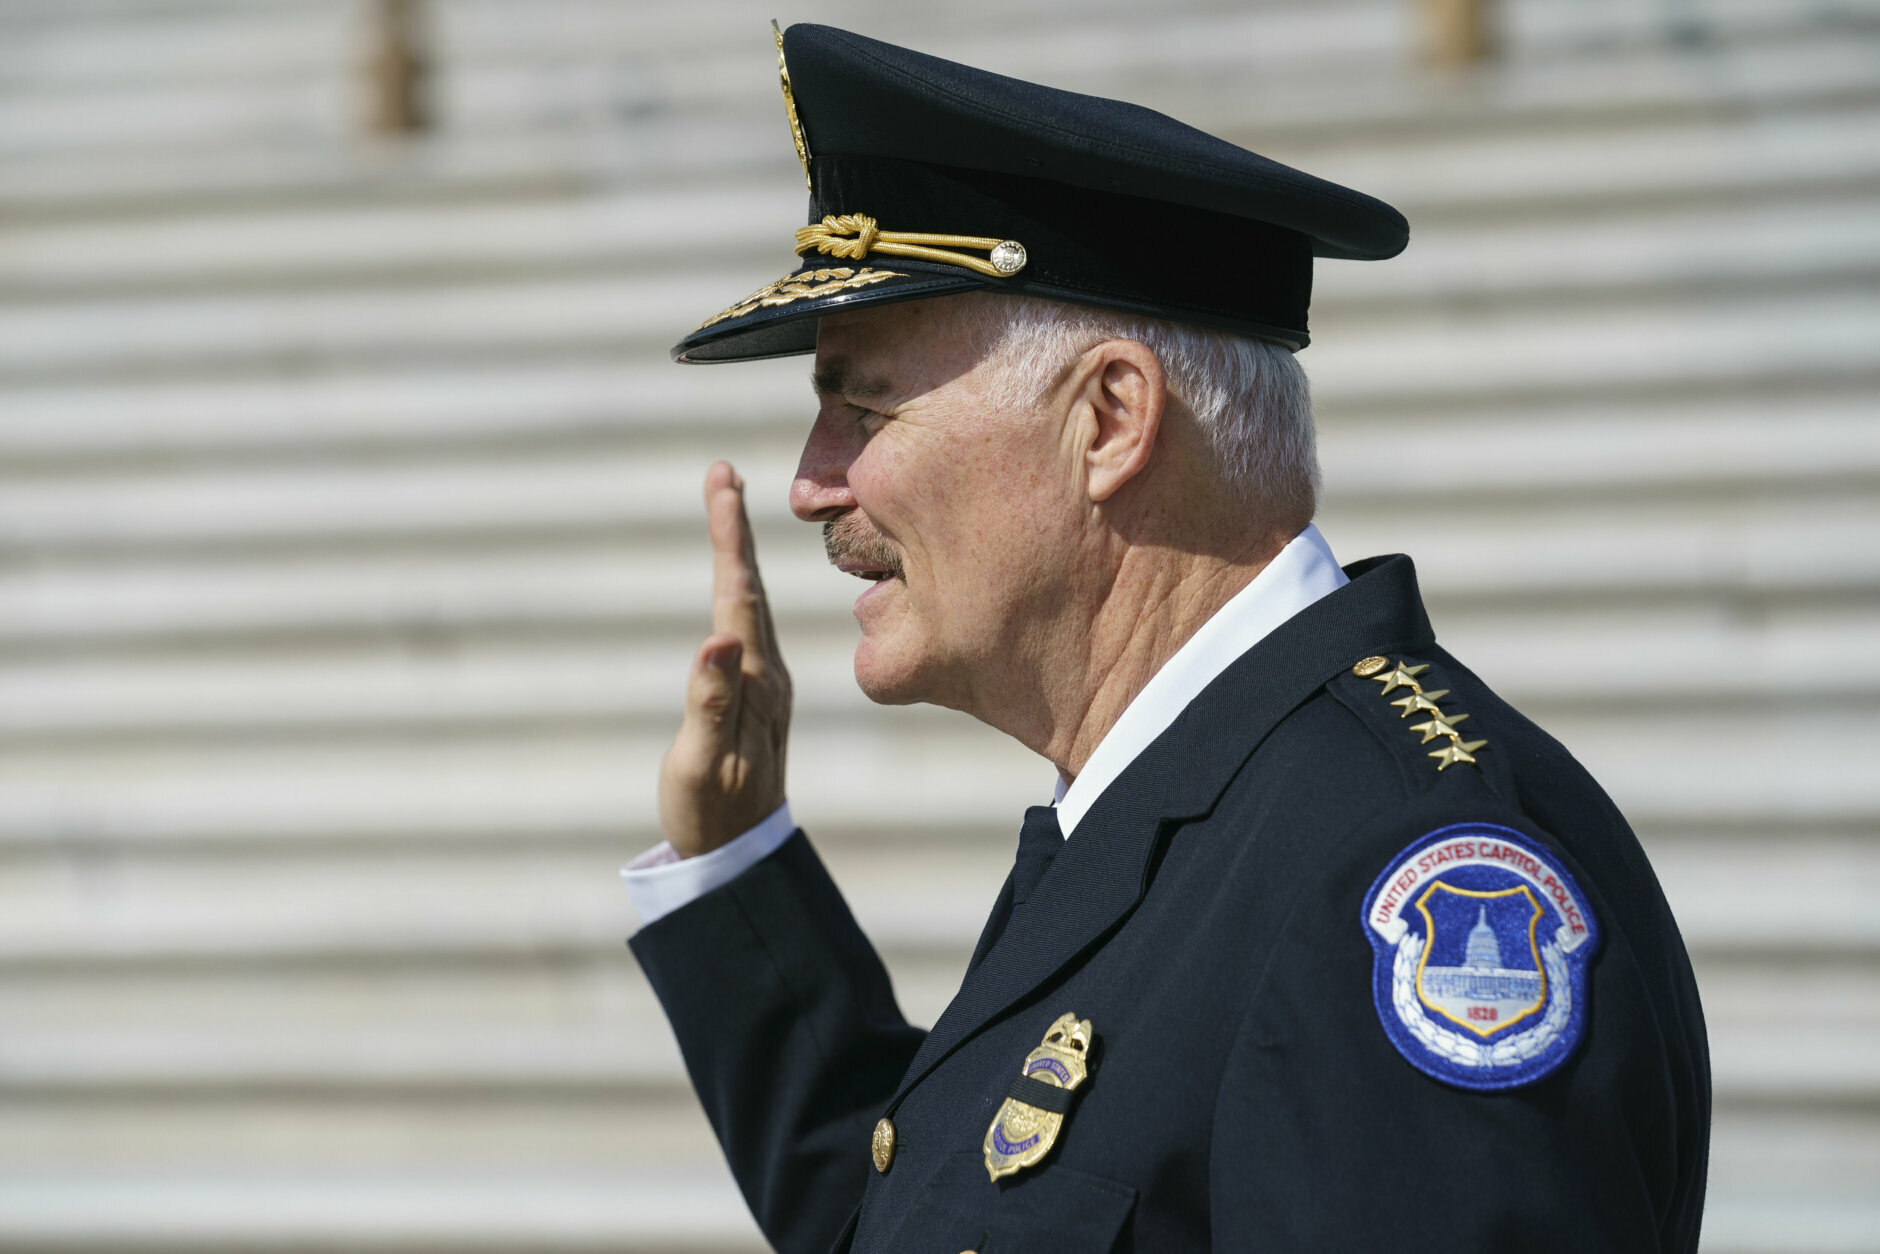 J. Thomas Manger, a veteran police chief of departments in the Washington, D.C., region, raises his hand as he accepts the oath to take over the United States Capitol Police following the resignations of the previous leadership after the Jan. insurrection, the Capitol in Washington, Friday, July 23, 2021. (AP Photo/J. Scott Applewhite)